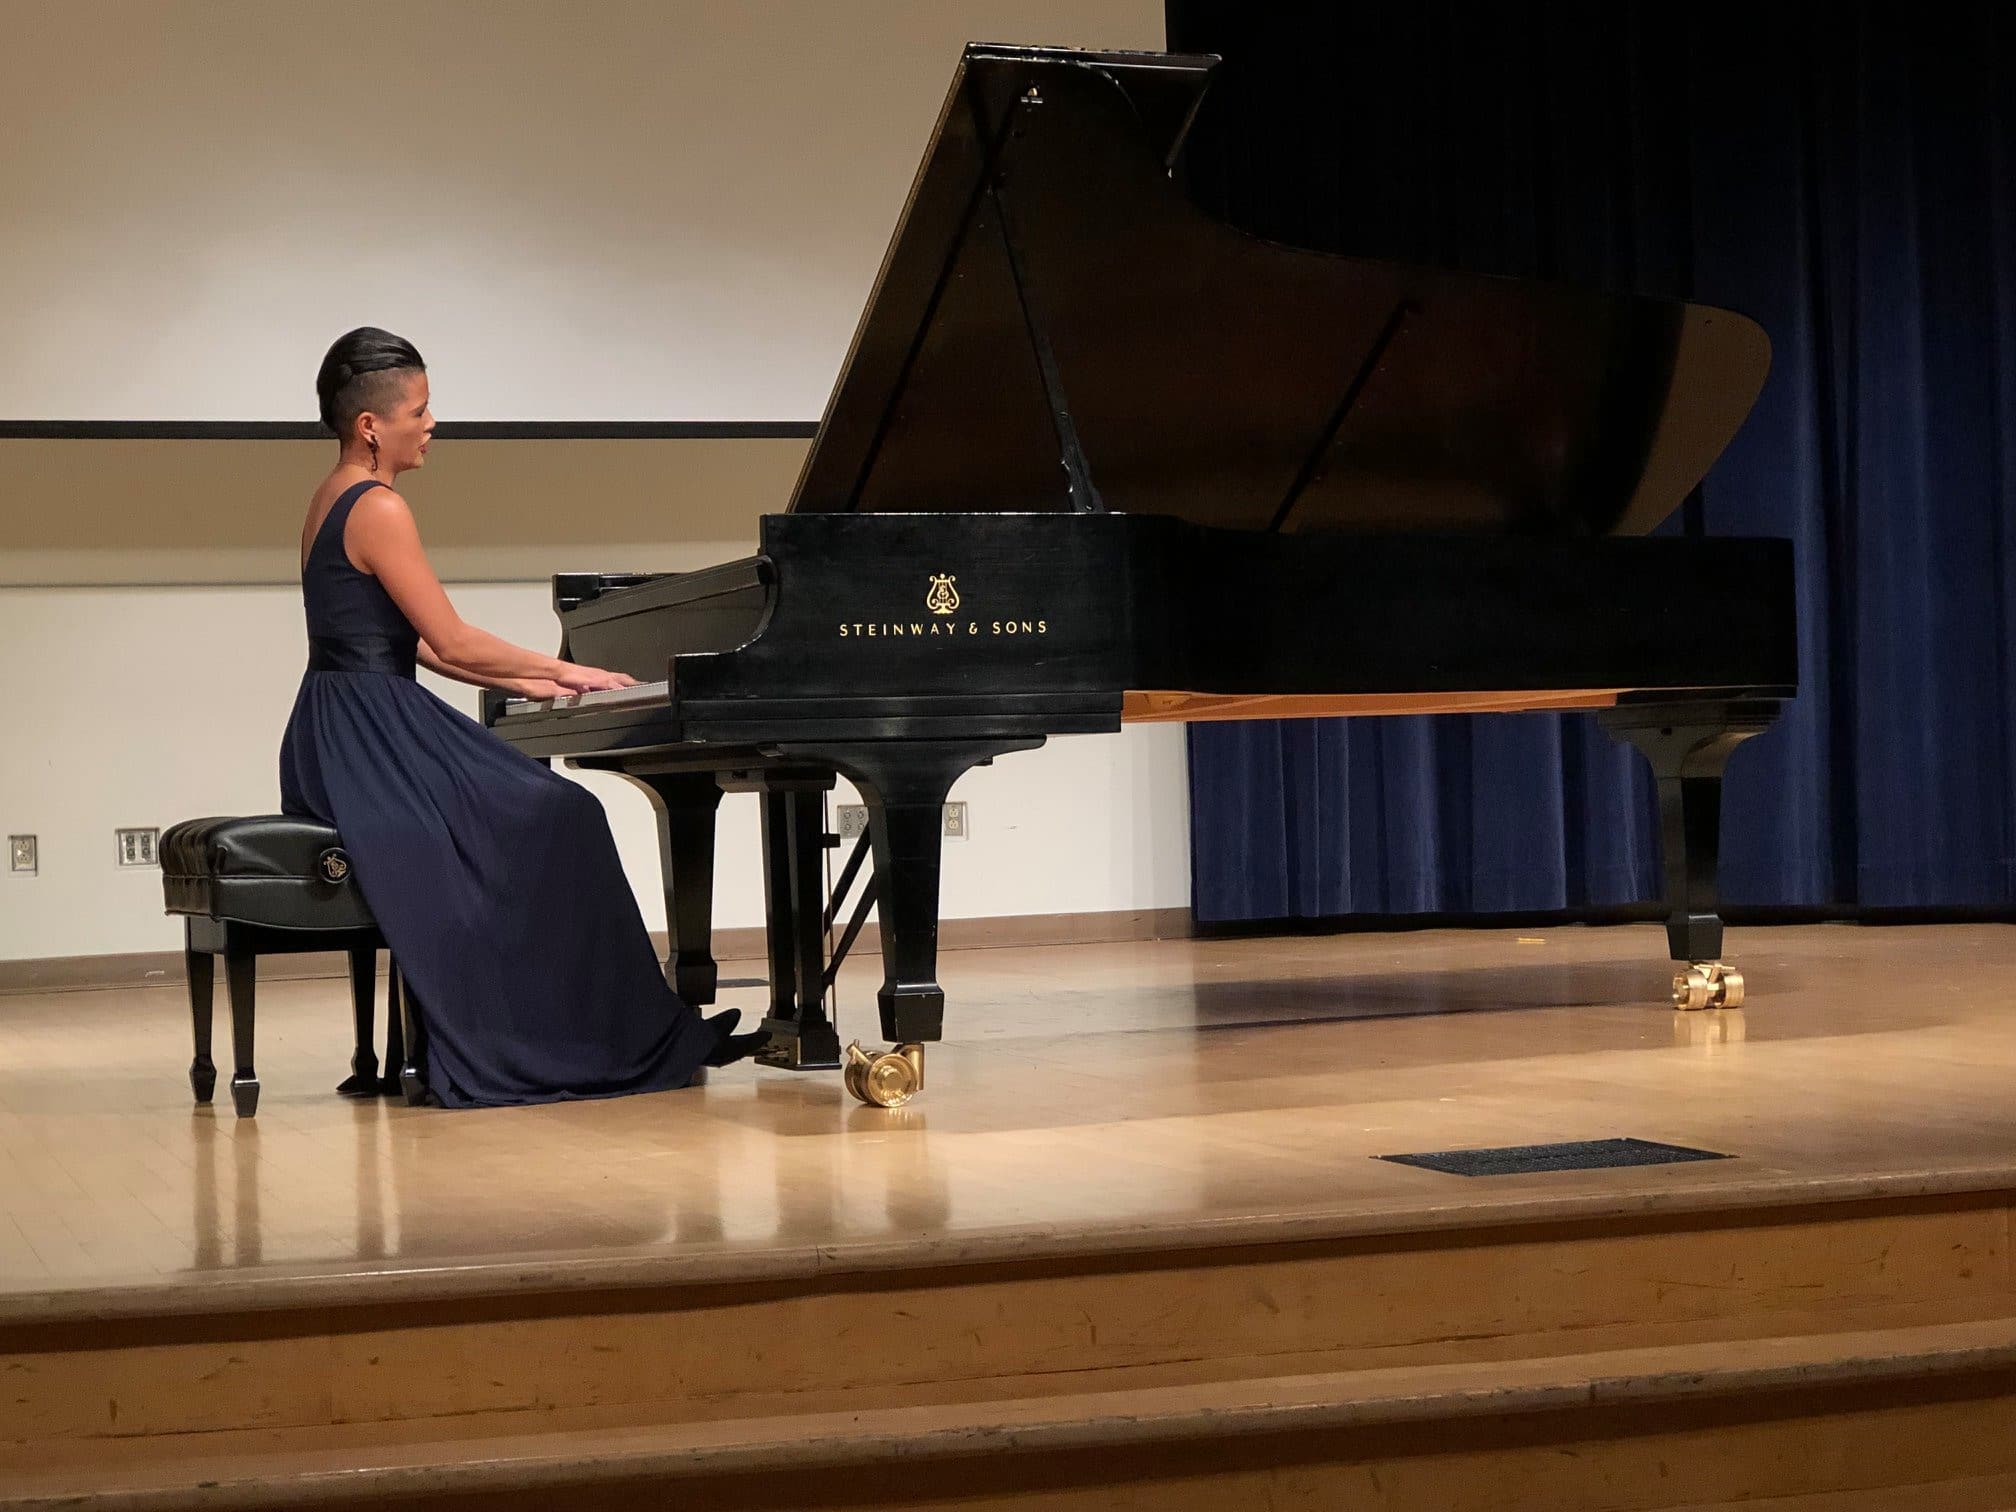 A Celebration of Life and Artistry of Dr Eugene Alcalay - Recital - Judy Tran